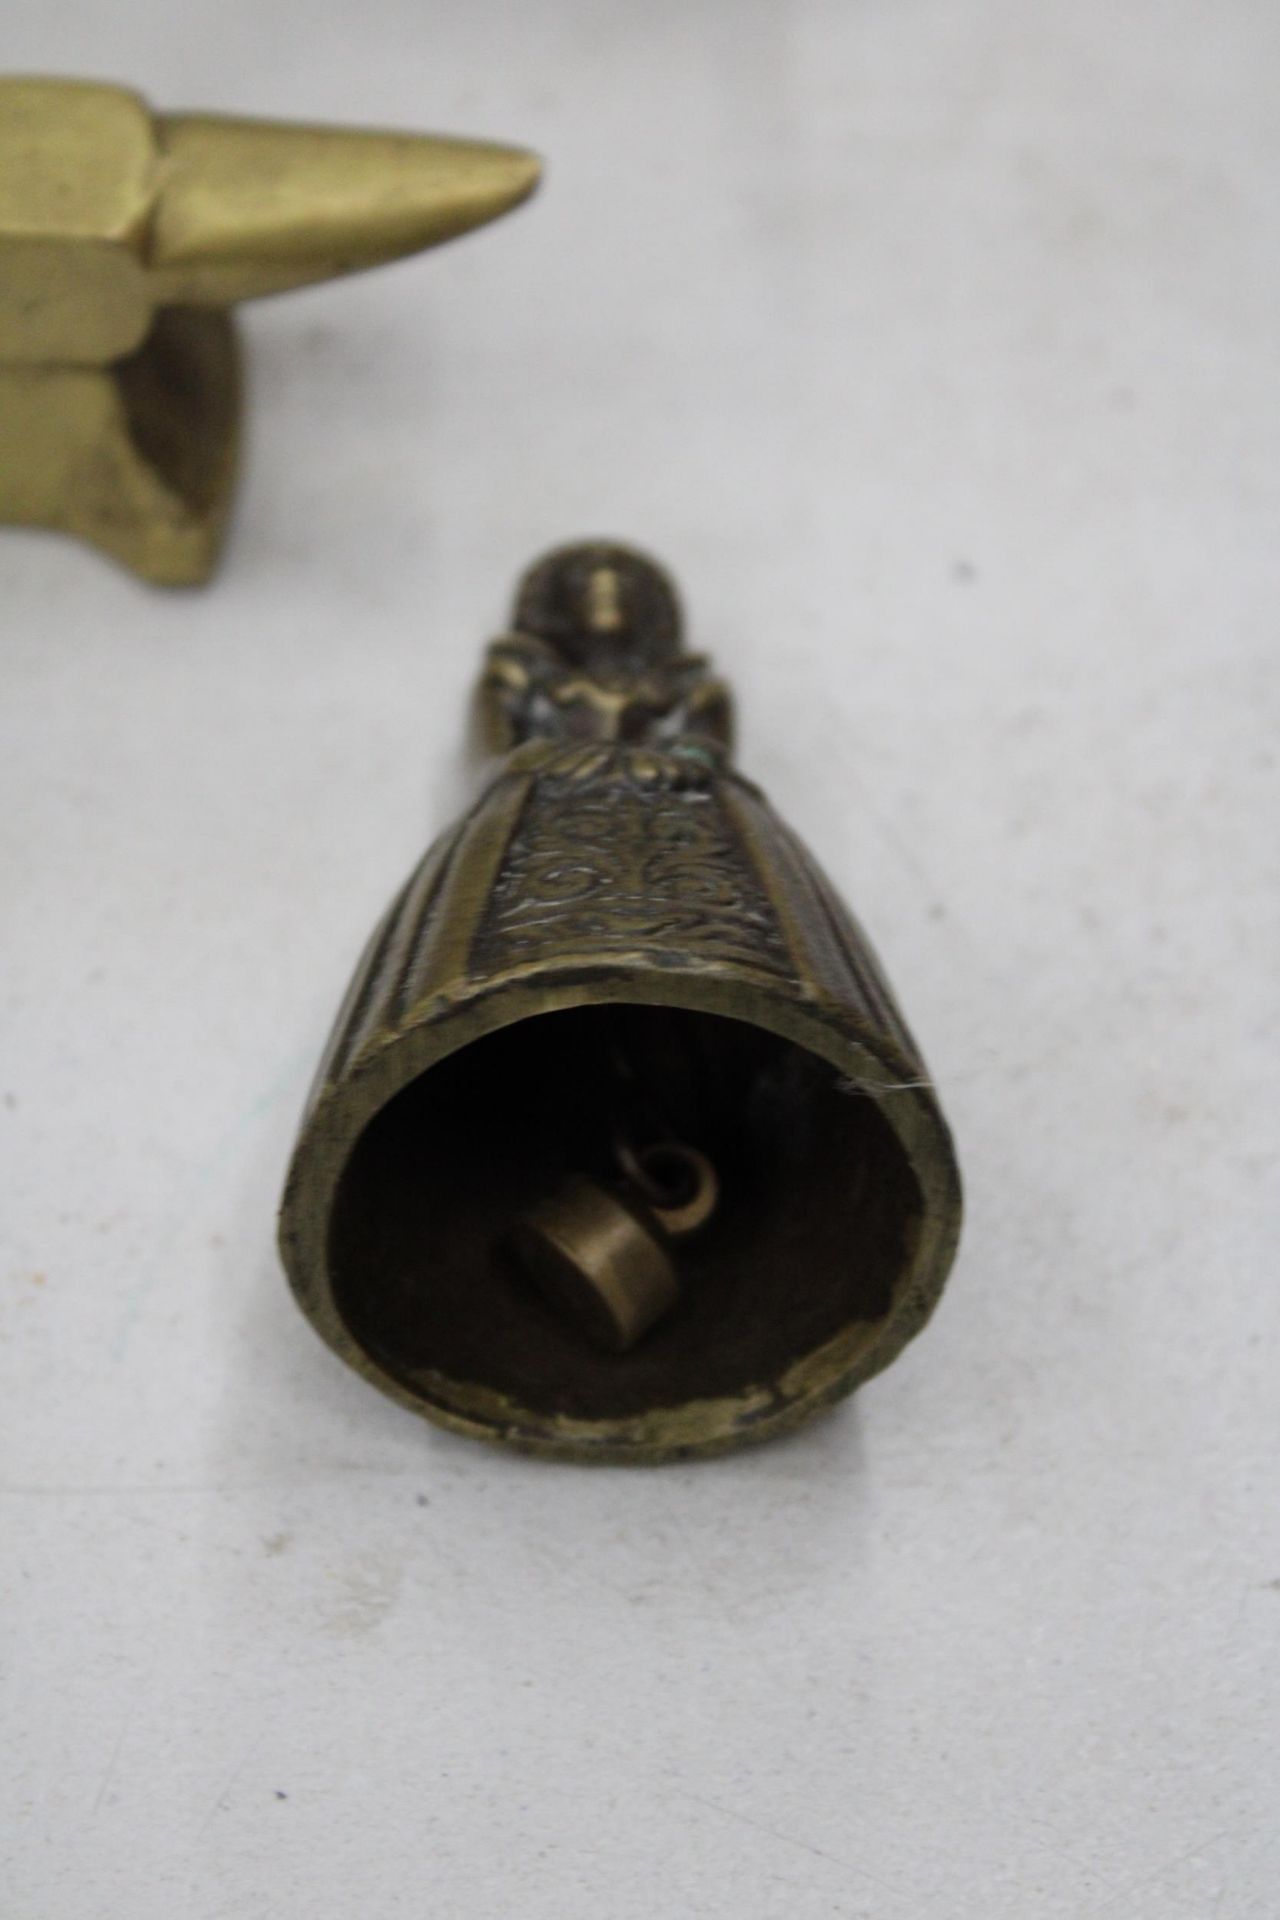 A COLLECTION OF MINIATURE ITEMS TO INCLUDE THREE IRONS, A BRASS ANVIL AND A 'LADY' BELL - Image 3 of 4